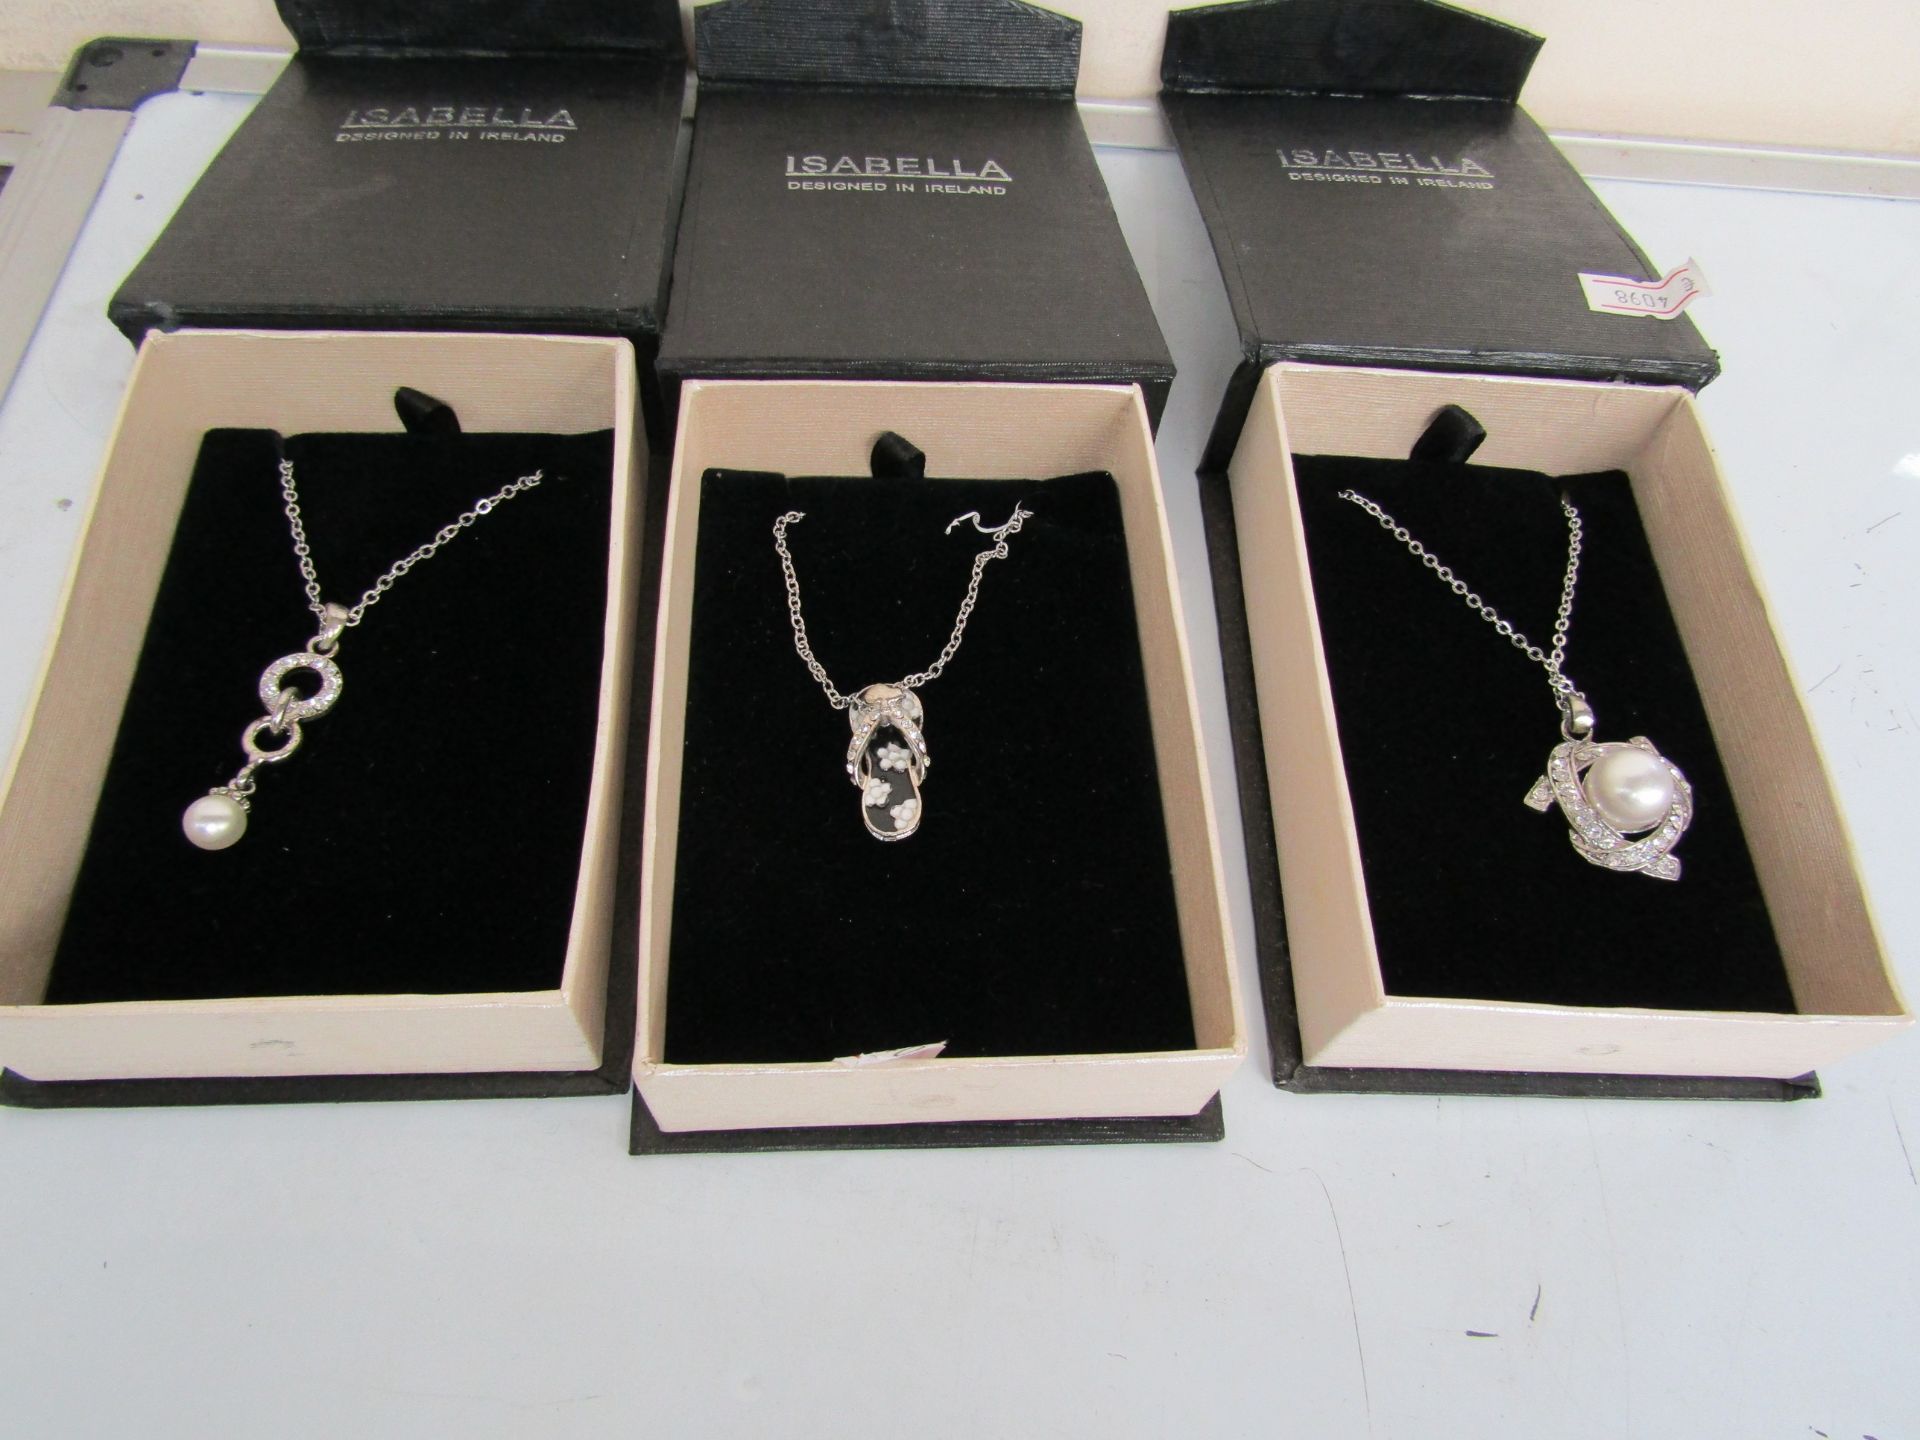 4x Isabelle Silver plated Necklaces, Various Styles, please note the styles are picked at random and